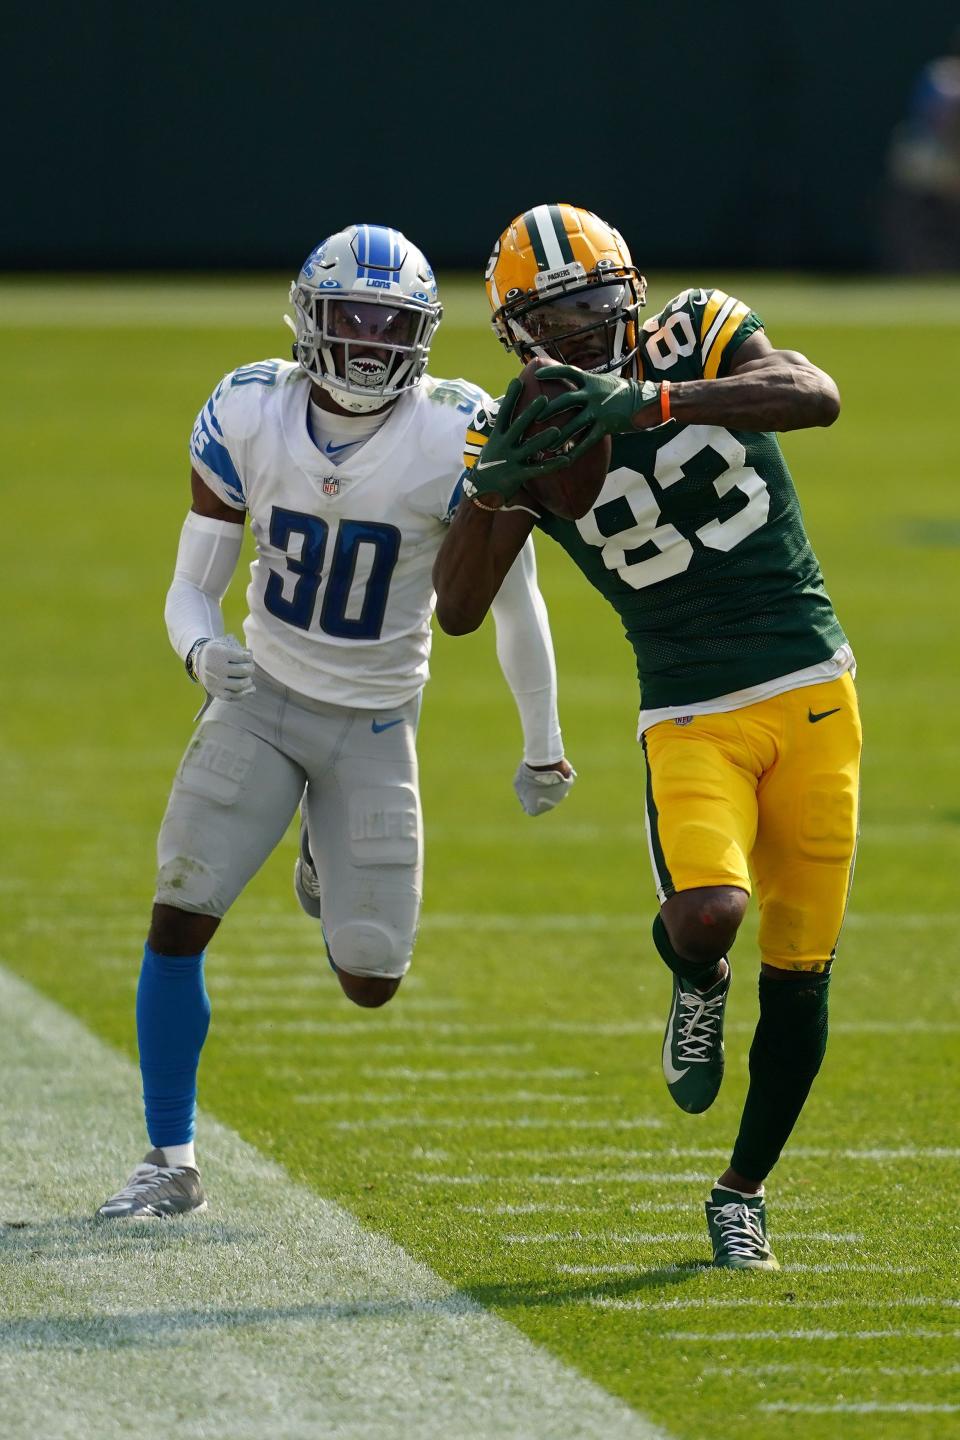 Green Bay Packers' Marquez Valdes-Scantling catches a pass in front of Detroit Lions' Jeff Okudah during the second half at Lambeau Field on Sept. 20, 2020 in Green Bay, Wis.